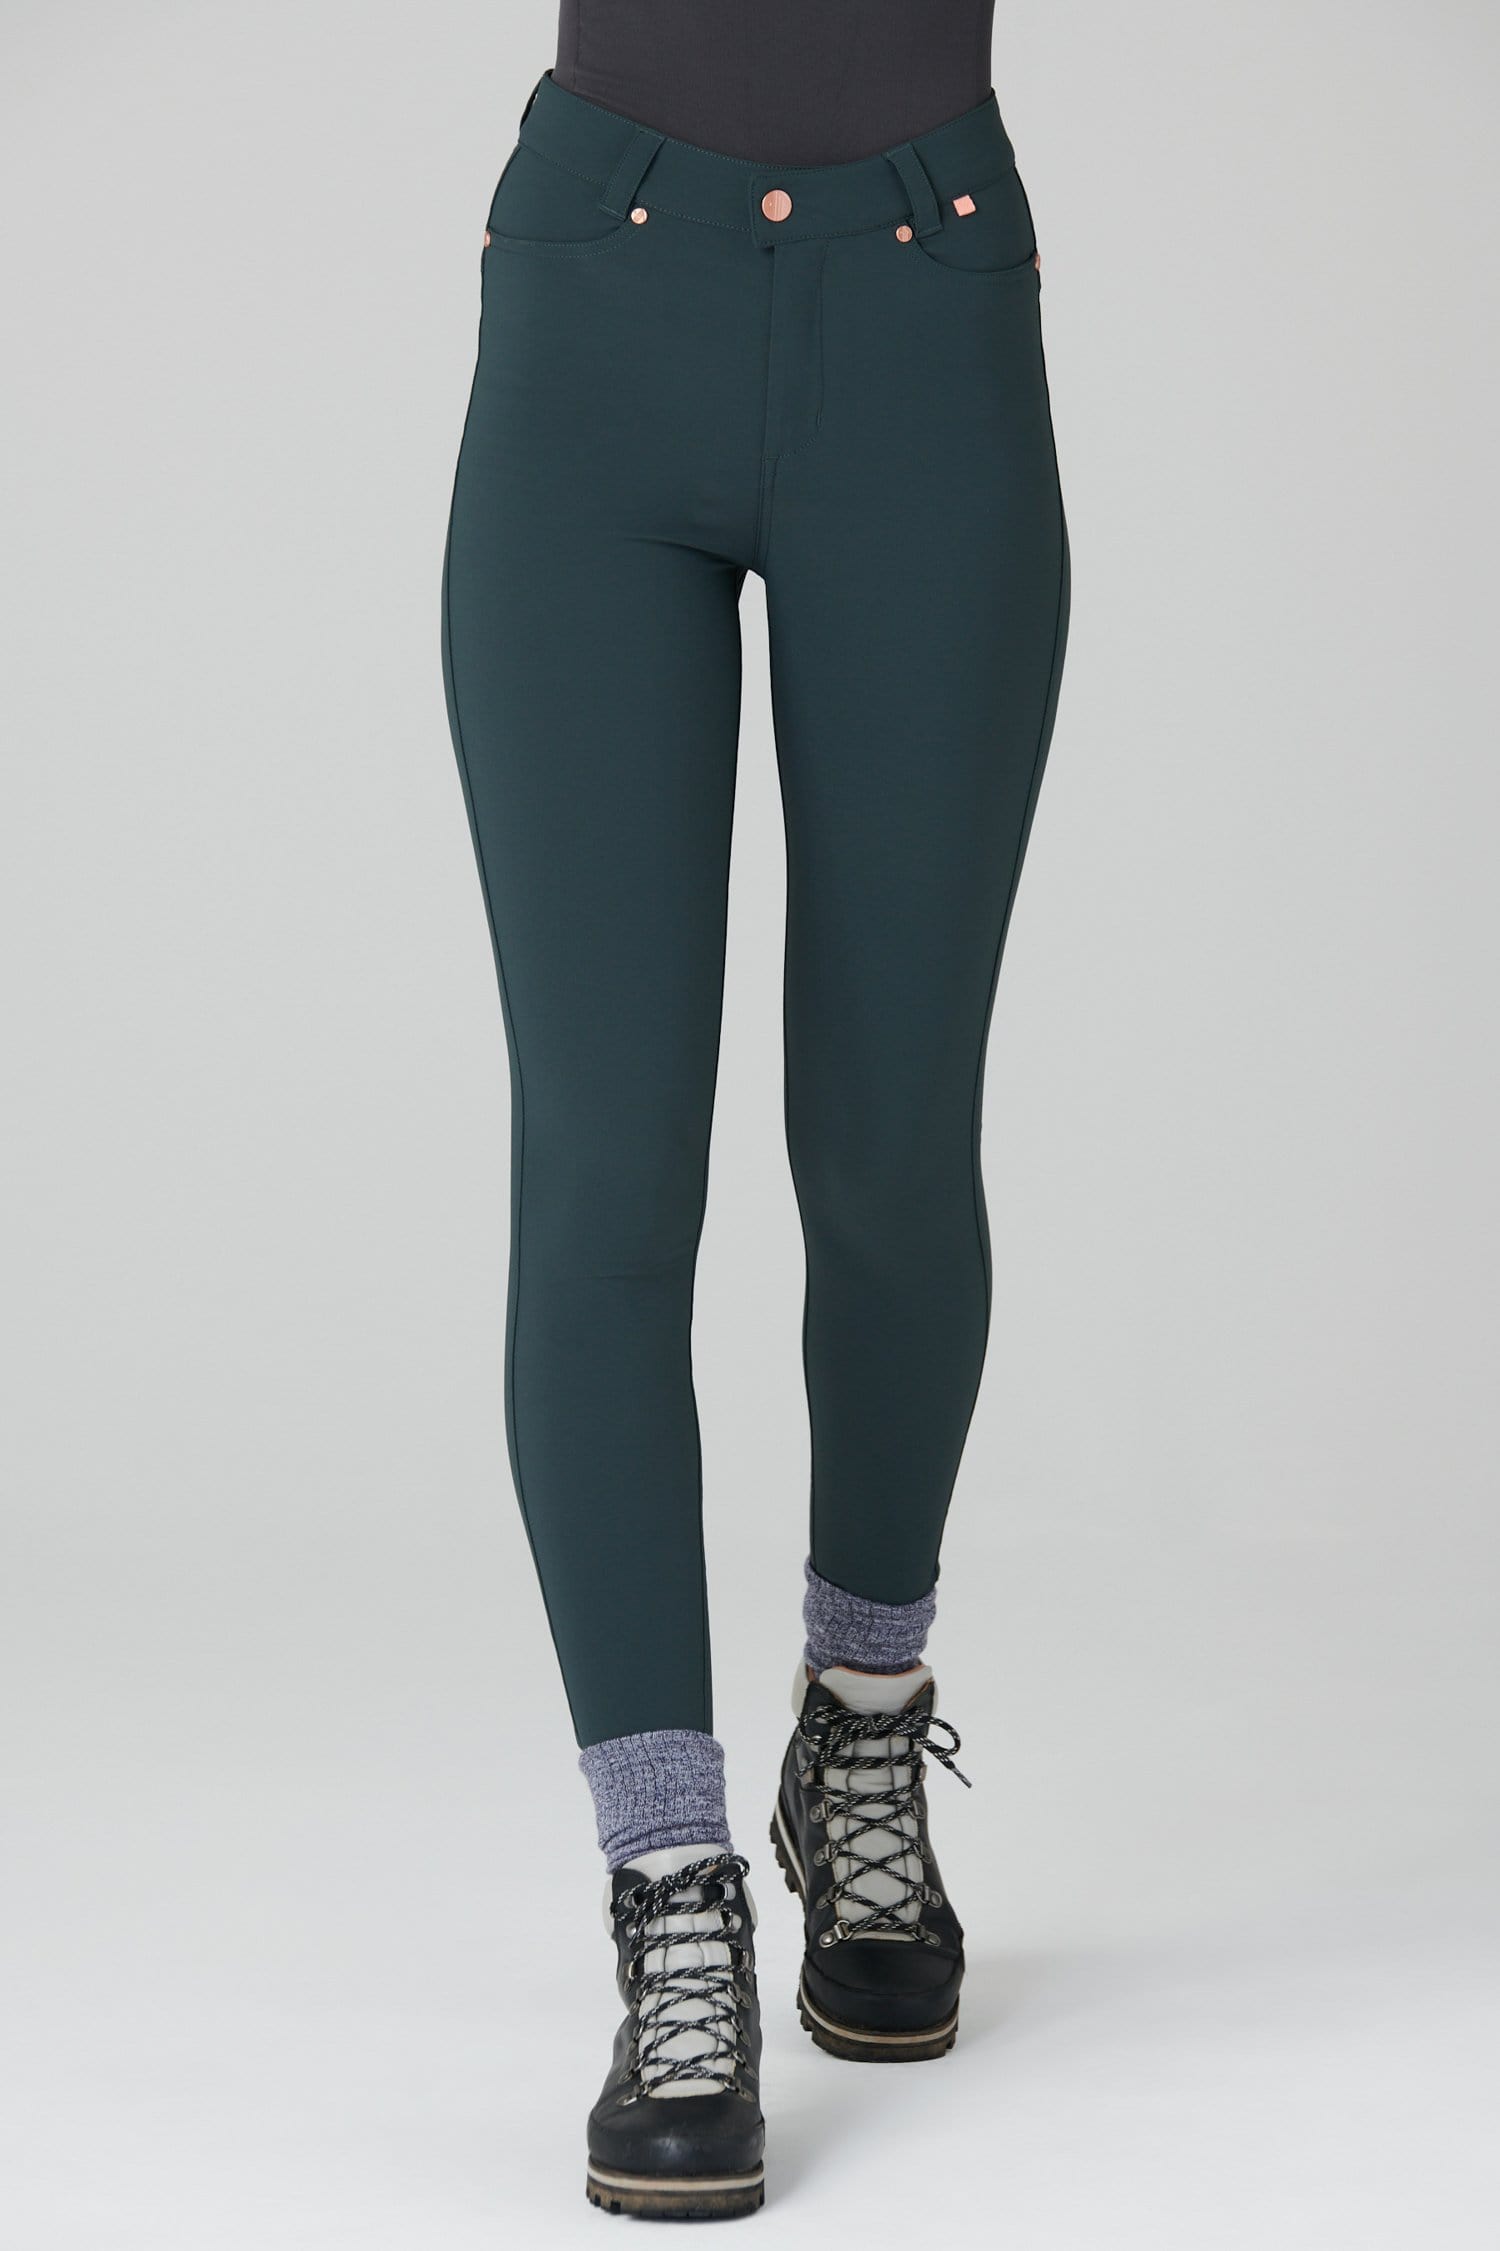 Max Stretch Skinny Outdoor Trousers - Forest Green - 26r / Uk8 - Womens - Acai Outdoorwear